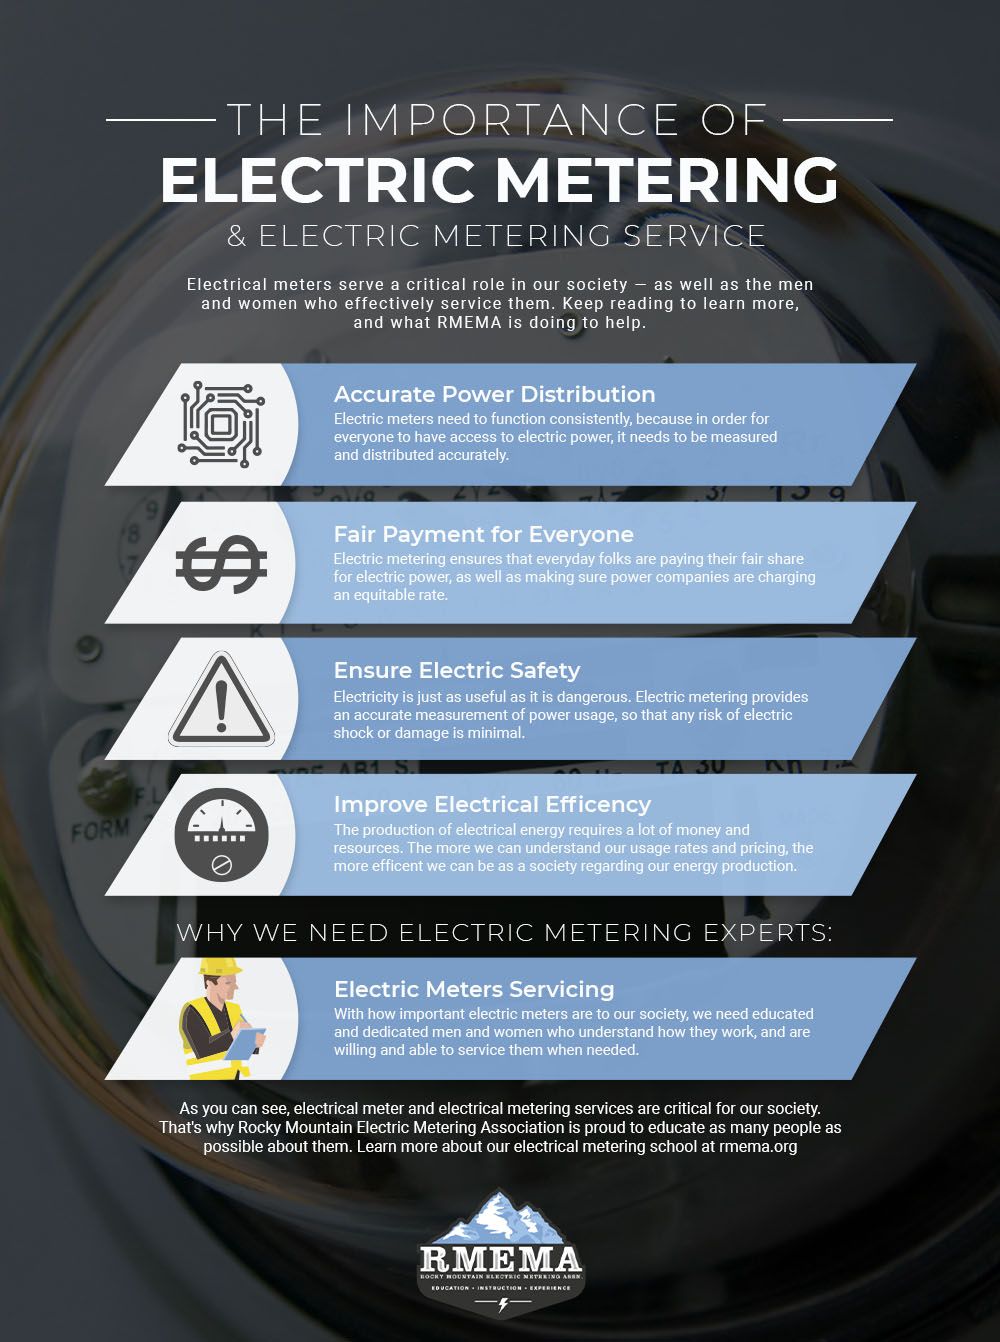 The-Importance-of-Electric-Metering-5e6fee55ca6bd.jpeg